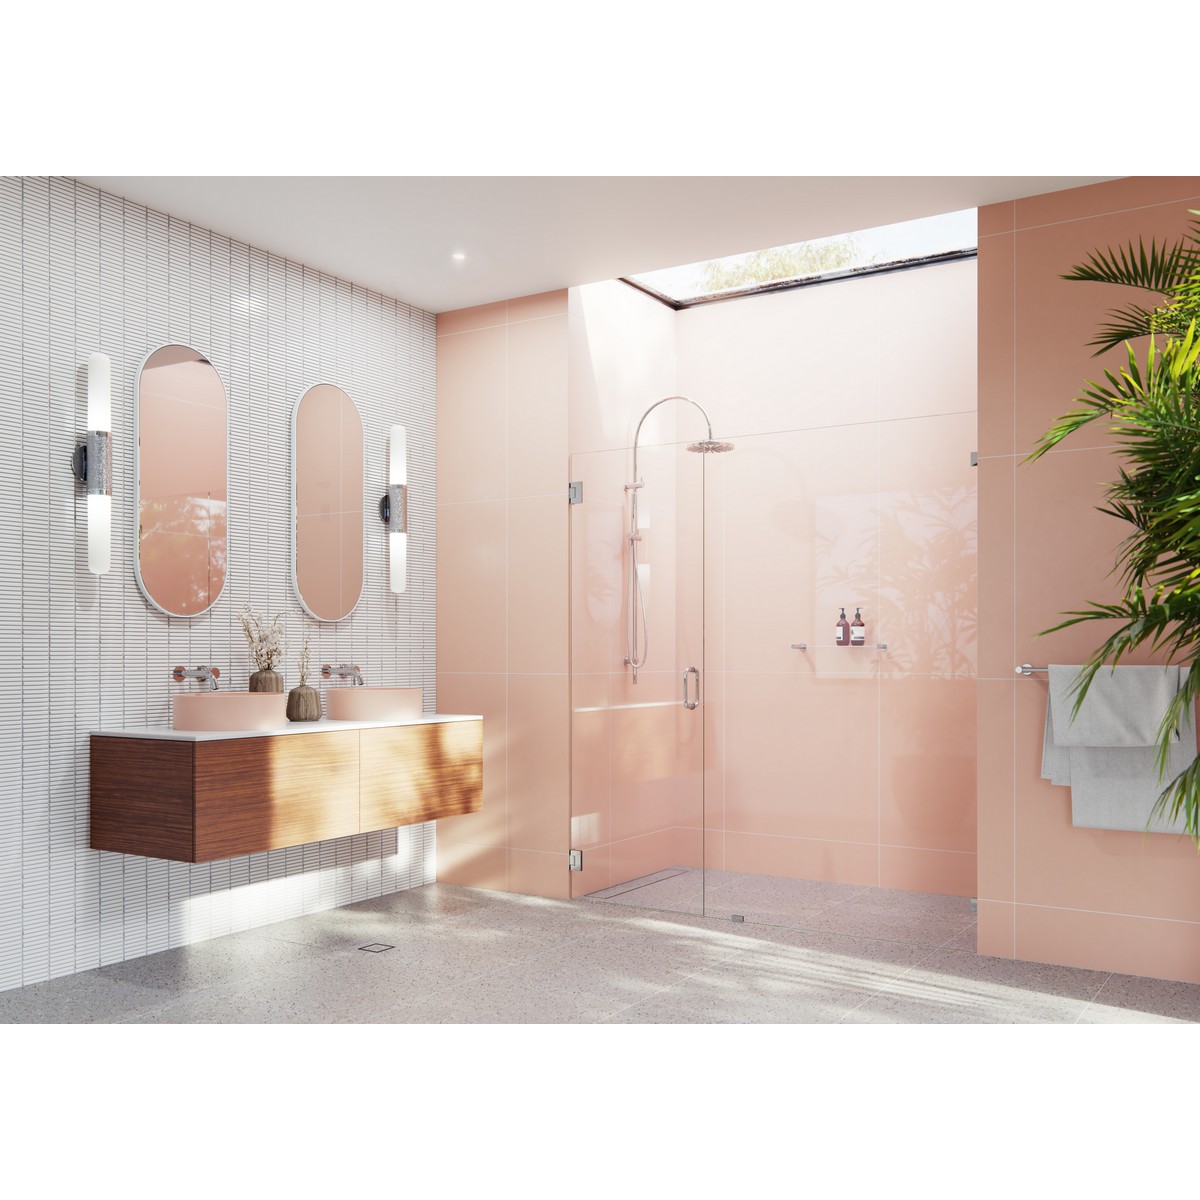 GLASS WAREHOUSE GW-WH-76.25 ILLUME 76 1/4 W X 78 H WALL HINGED FULLY FRAMELESS GLASS SHOWER ENCLOSURE